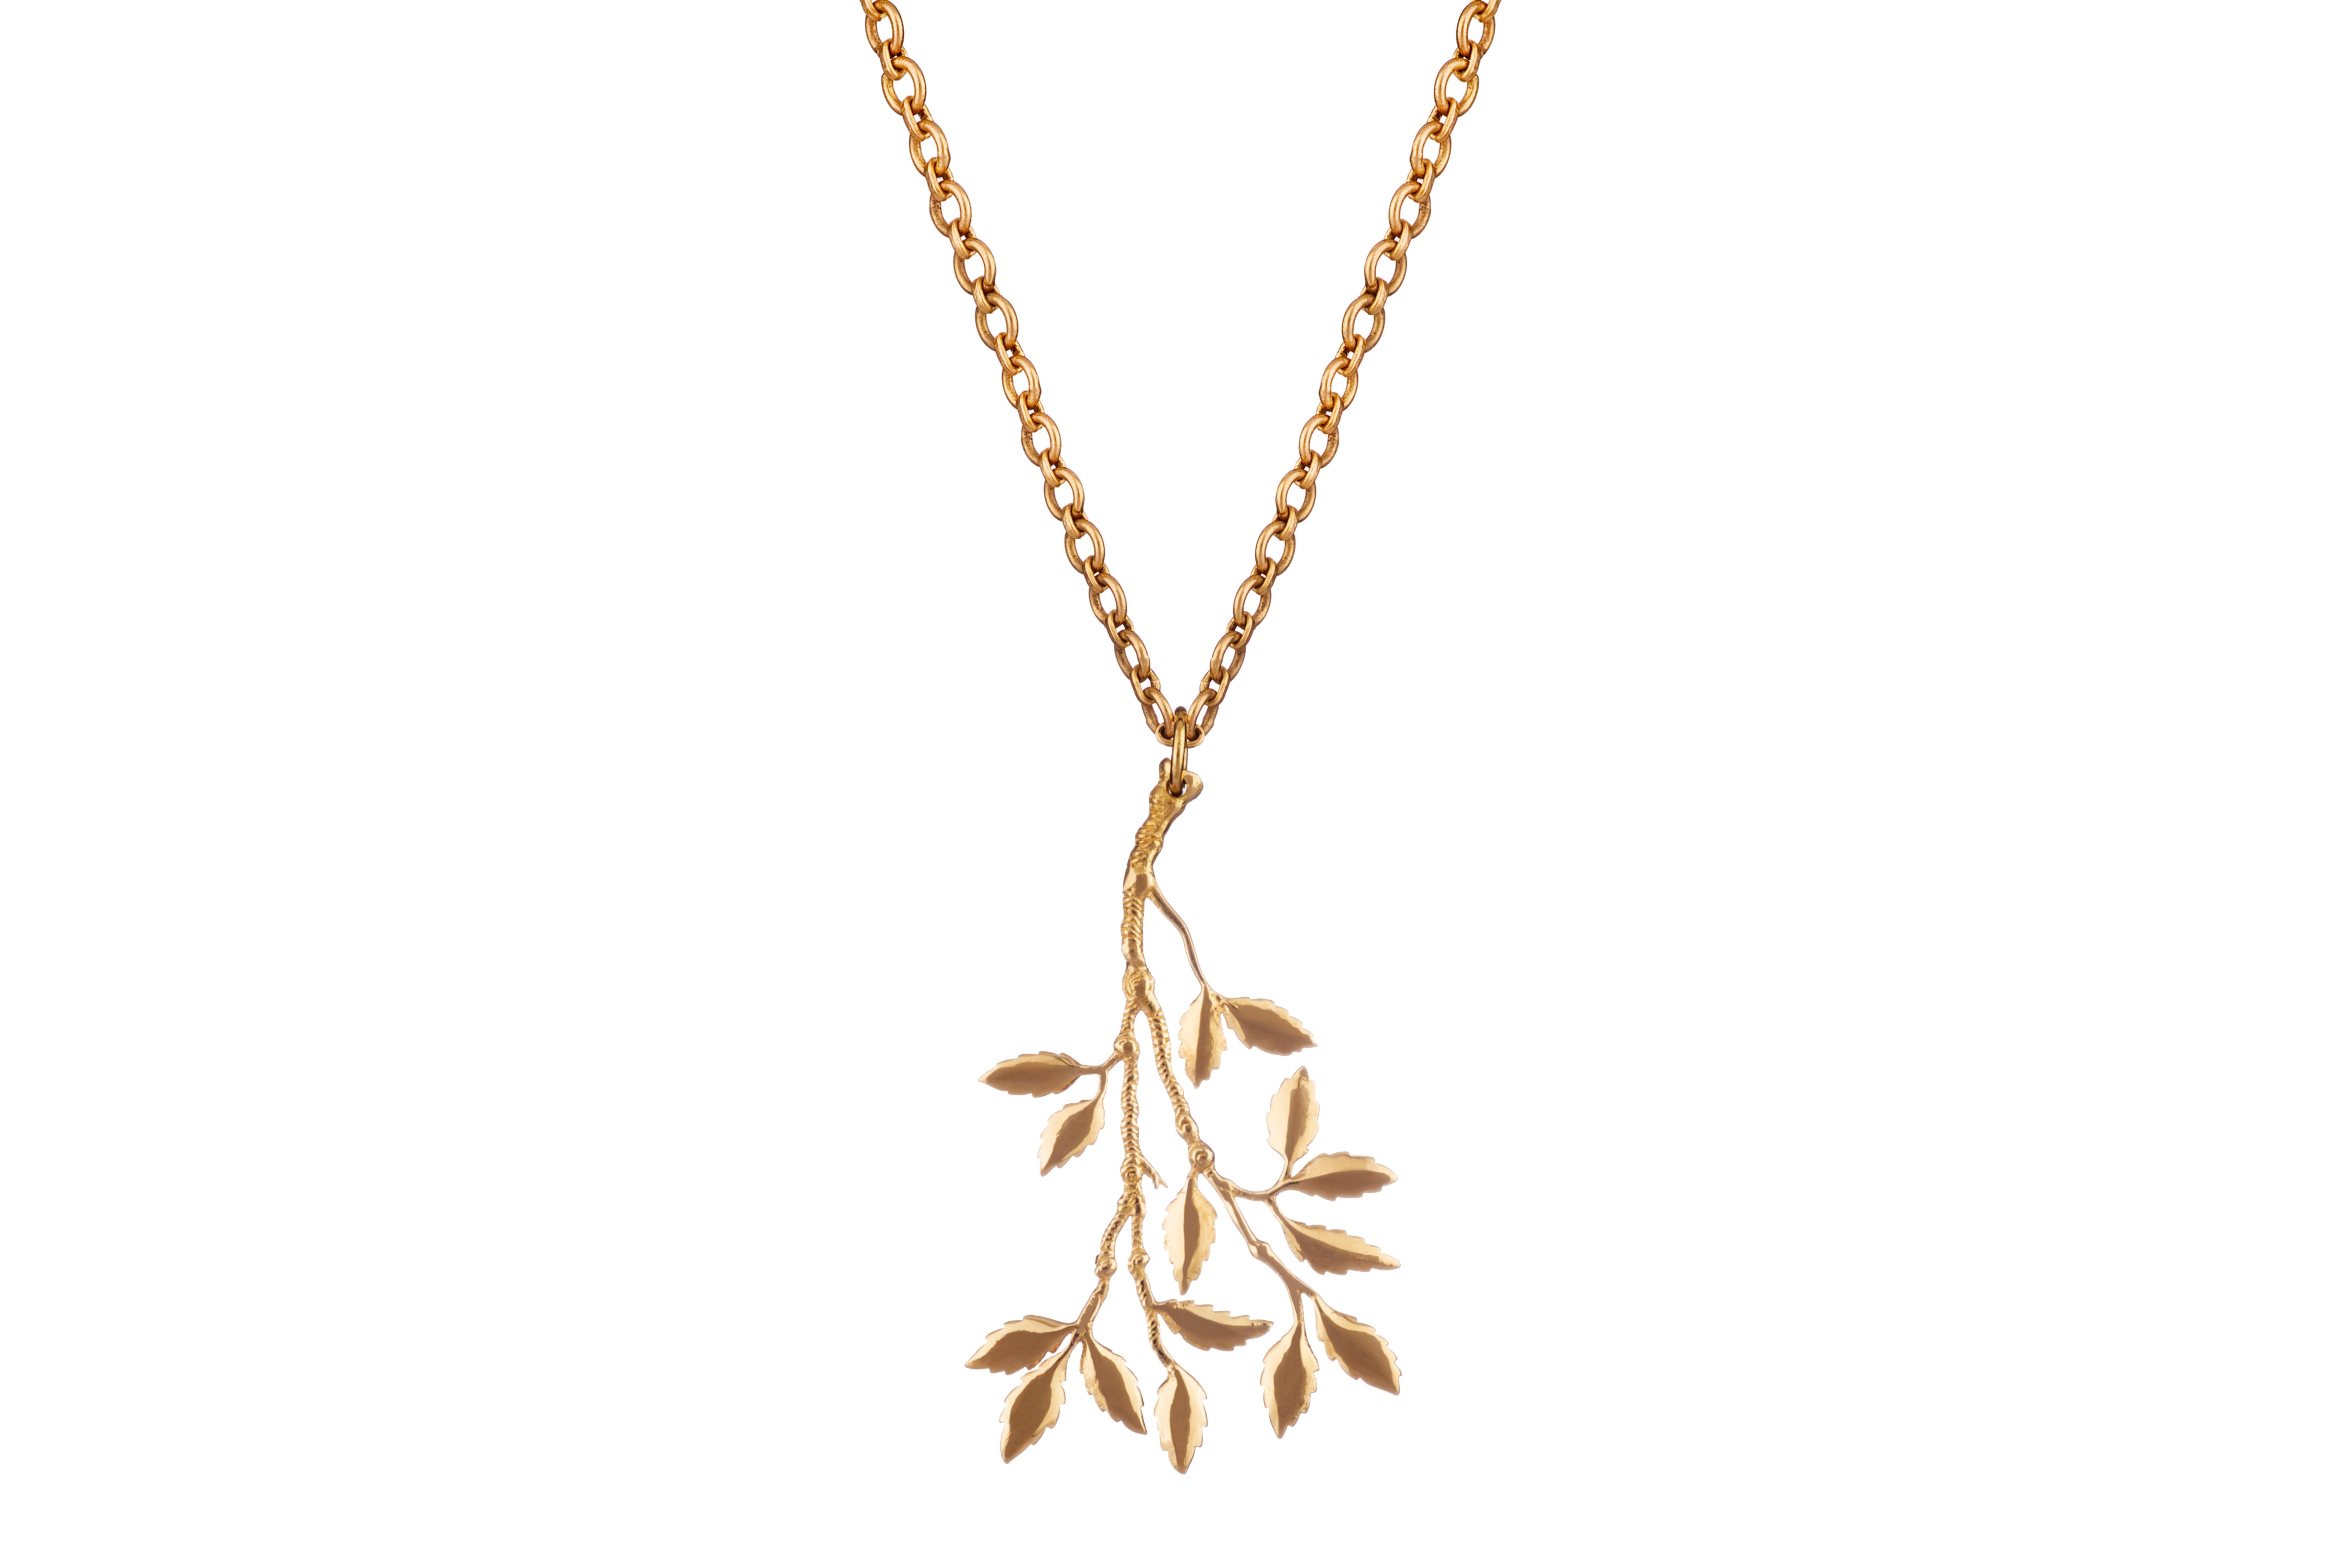 This is a small hand carved gold branch pendant with delicate leaves.  This can be worn with a handmade 18 karat gold or black rhodium plated chain options.  

OUROBOROS is an artisanal brand, based out of Jaipur and designed by the British